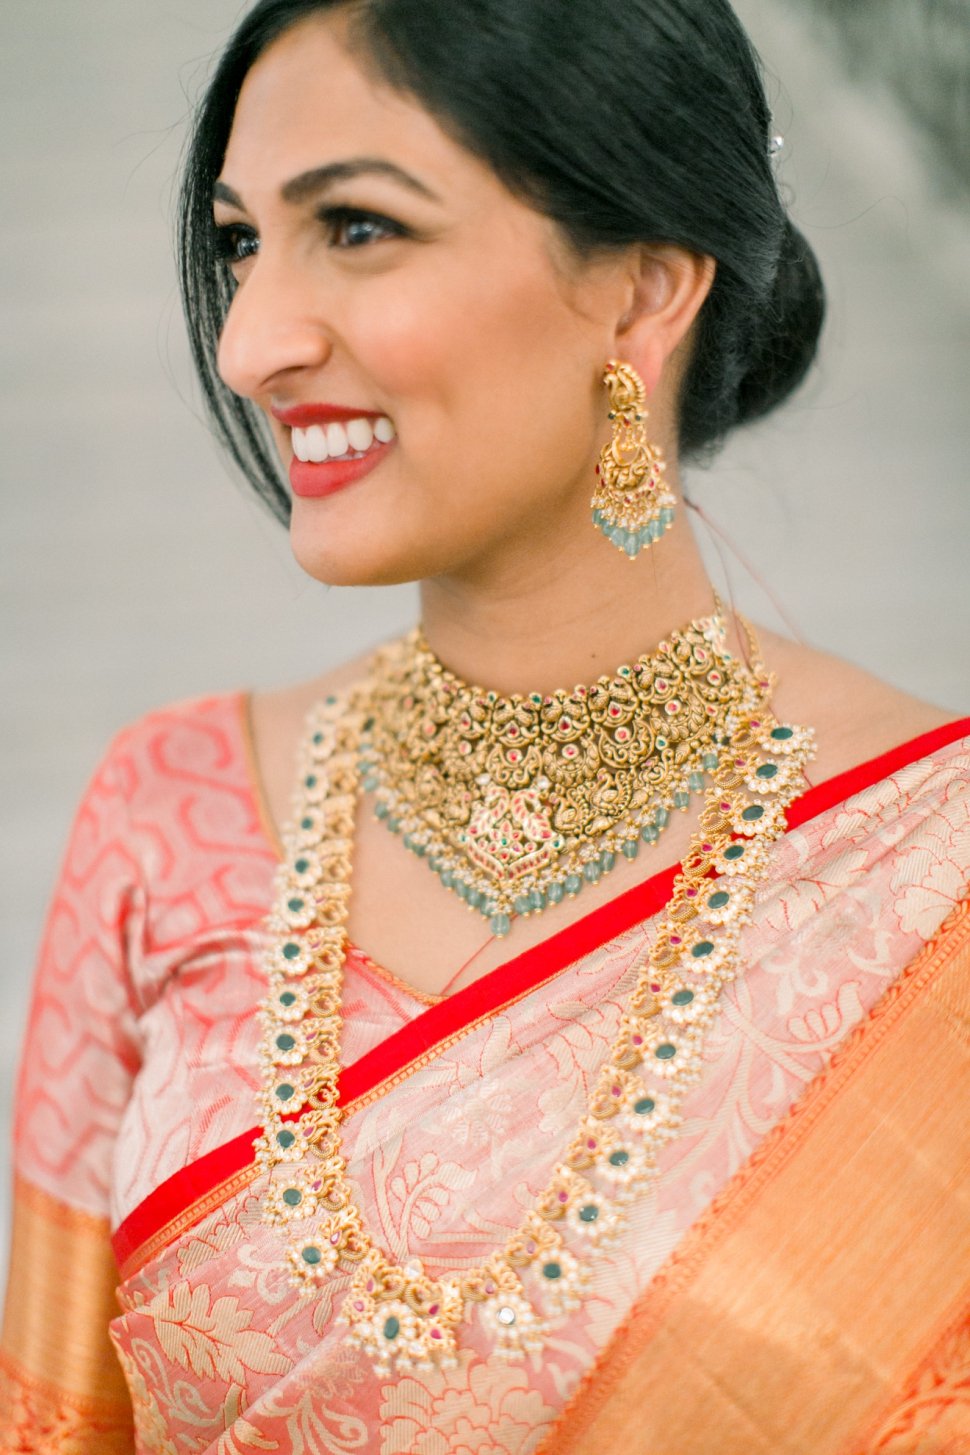 The-Rockleigh-Indian-American-Wedding-Cassi-Claire_47.jpg